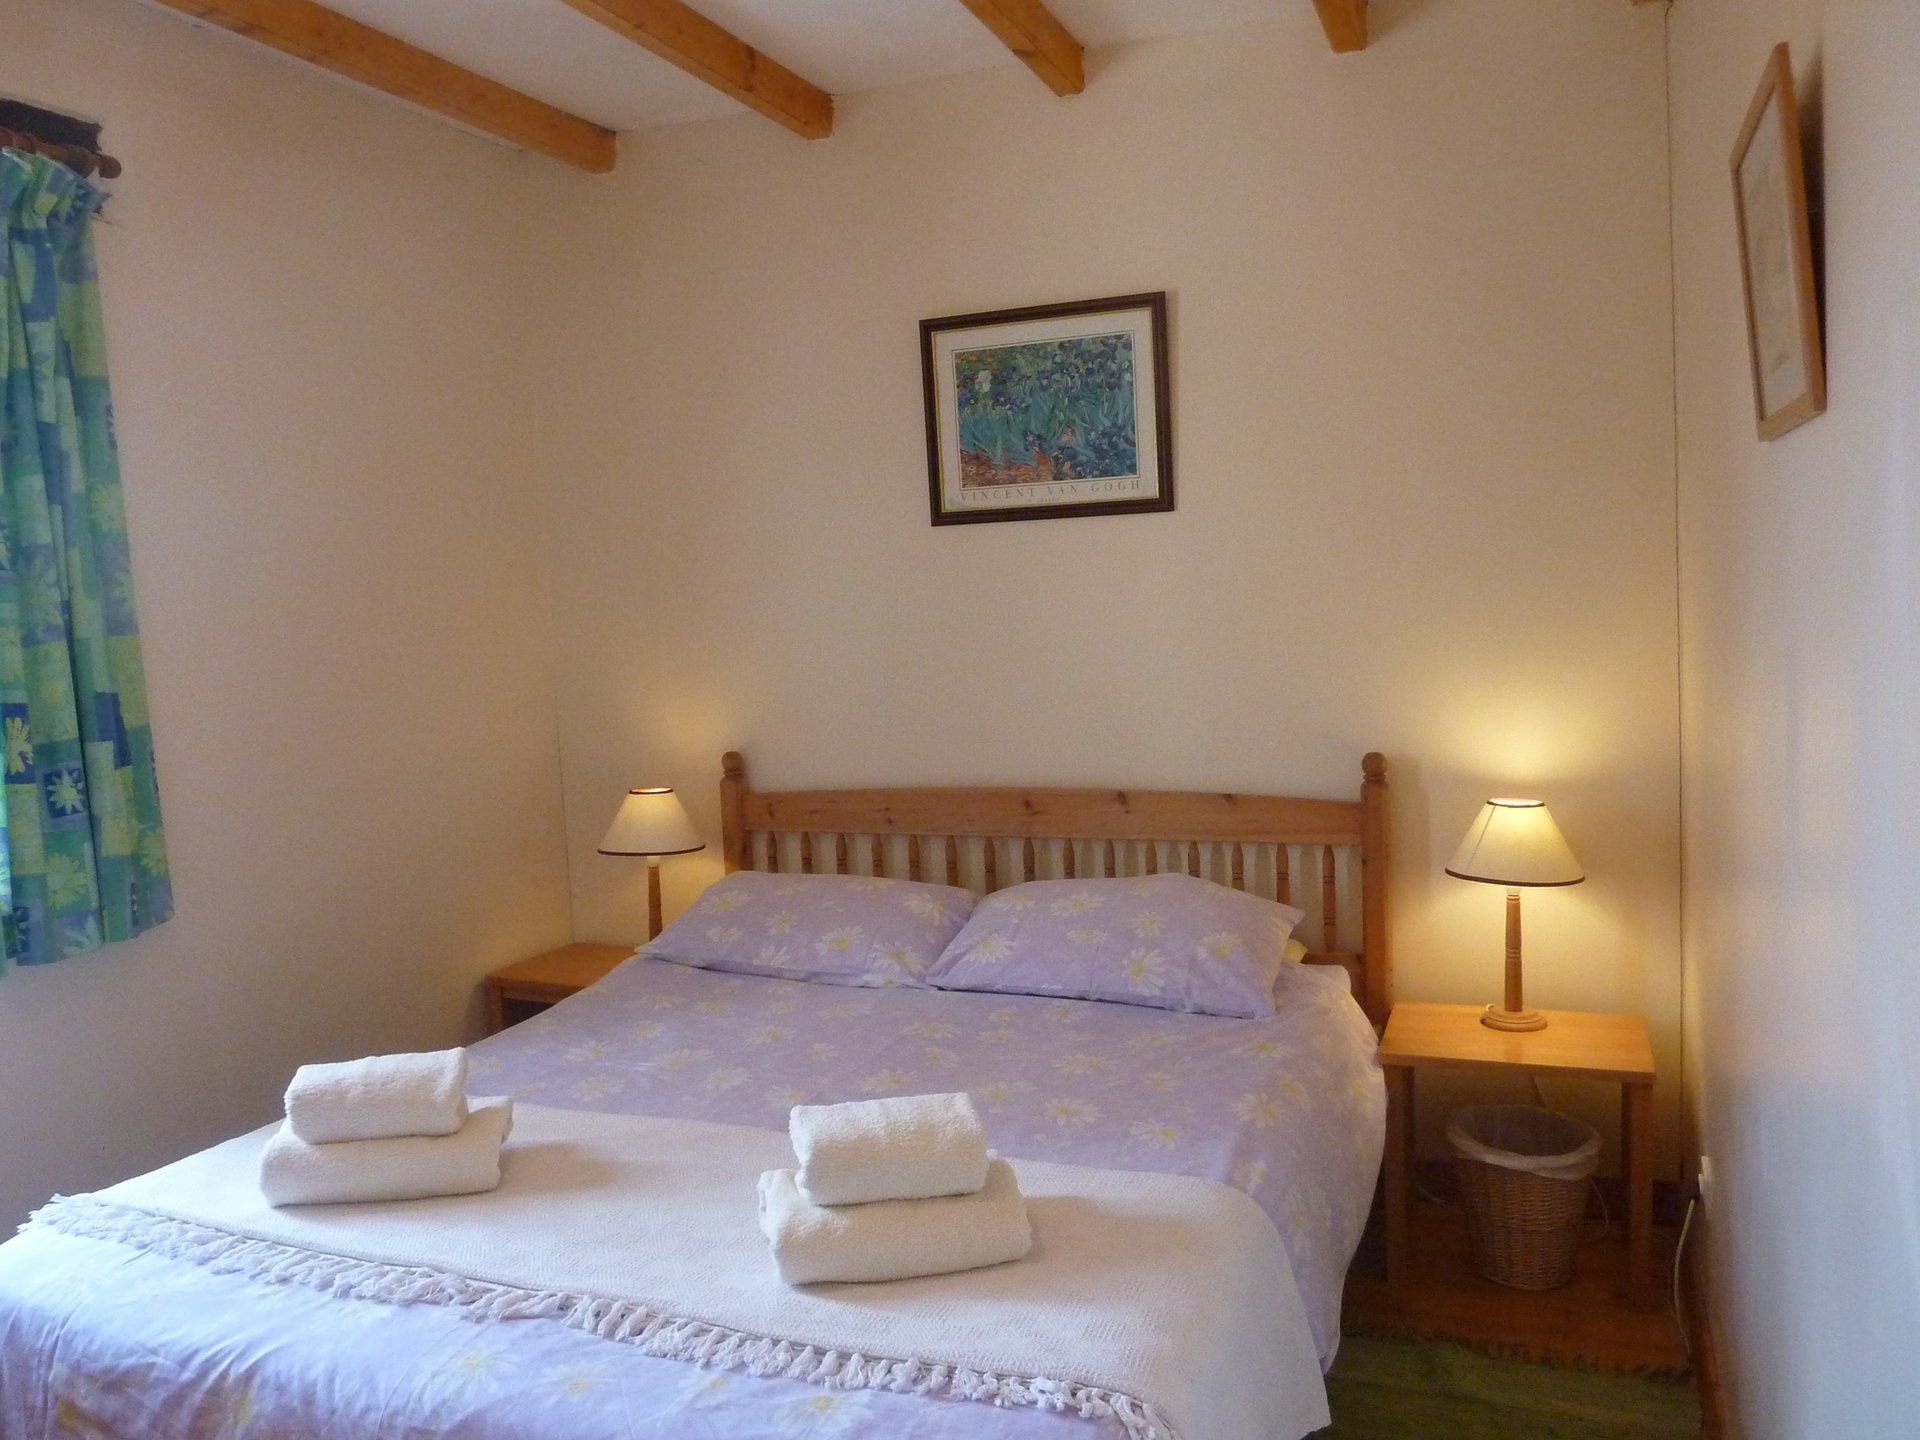 Vierge holiday cottage Les Vallaies France